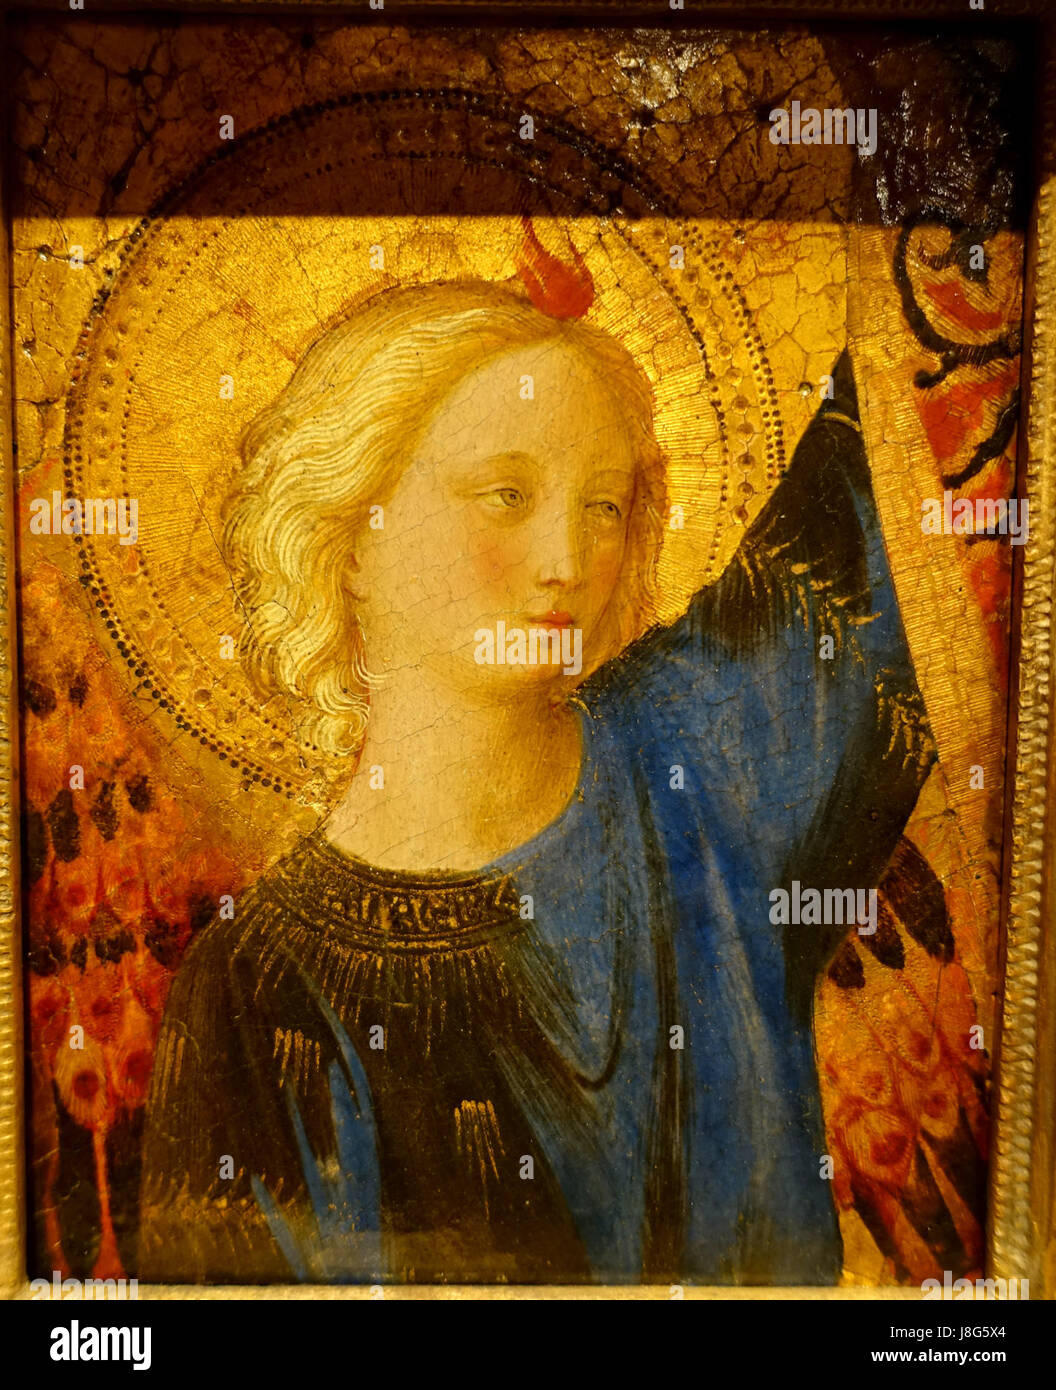 Head of an Angel, from an altarpiece now in the Rijksmuseum, by Guido di Pietro called Fra Angelico, c. 1445 1450, tempera and oil on panel   Wadsworth Atheneum   Hartford, CT   DSC05120 Stock Photo